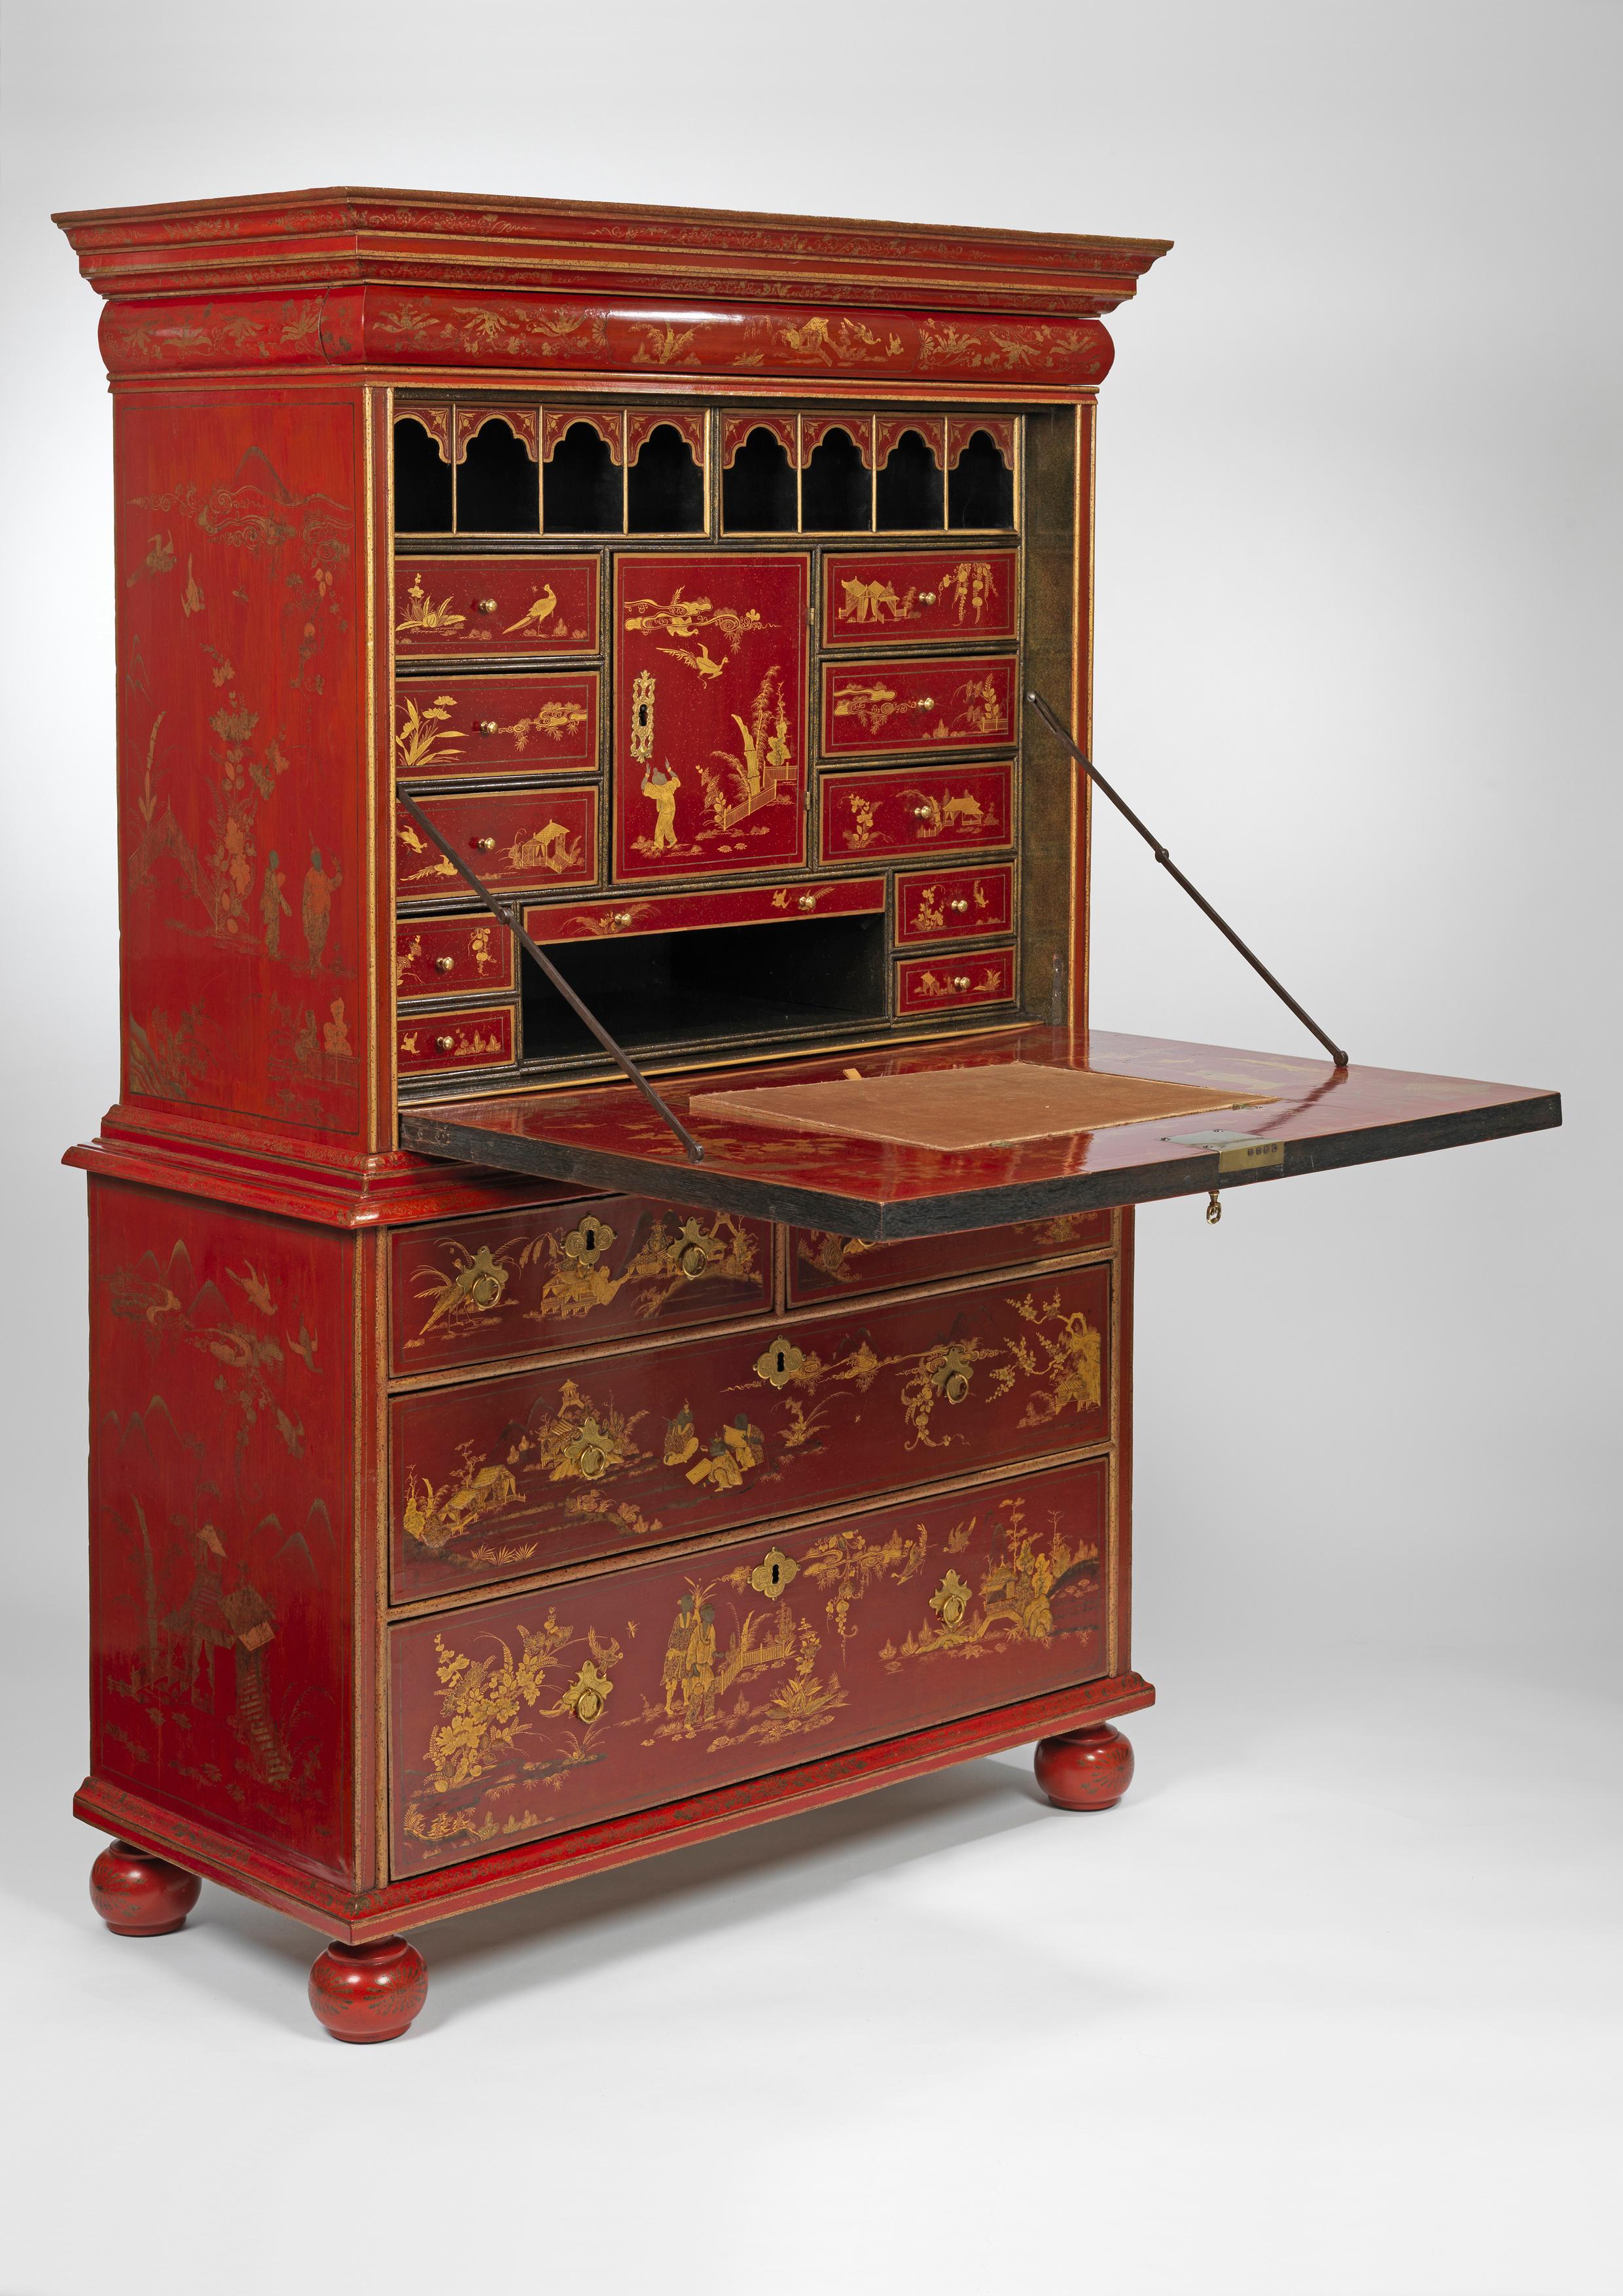 Decorated overall with elaborate chinoiserie scenes depicting figures and fantastical beasts in landscapes amongst scrolling foliage, with a frieze drawer above a fall-front door concealing an arrangement of pigeonholes, drawers, secret